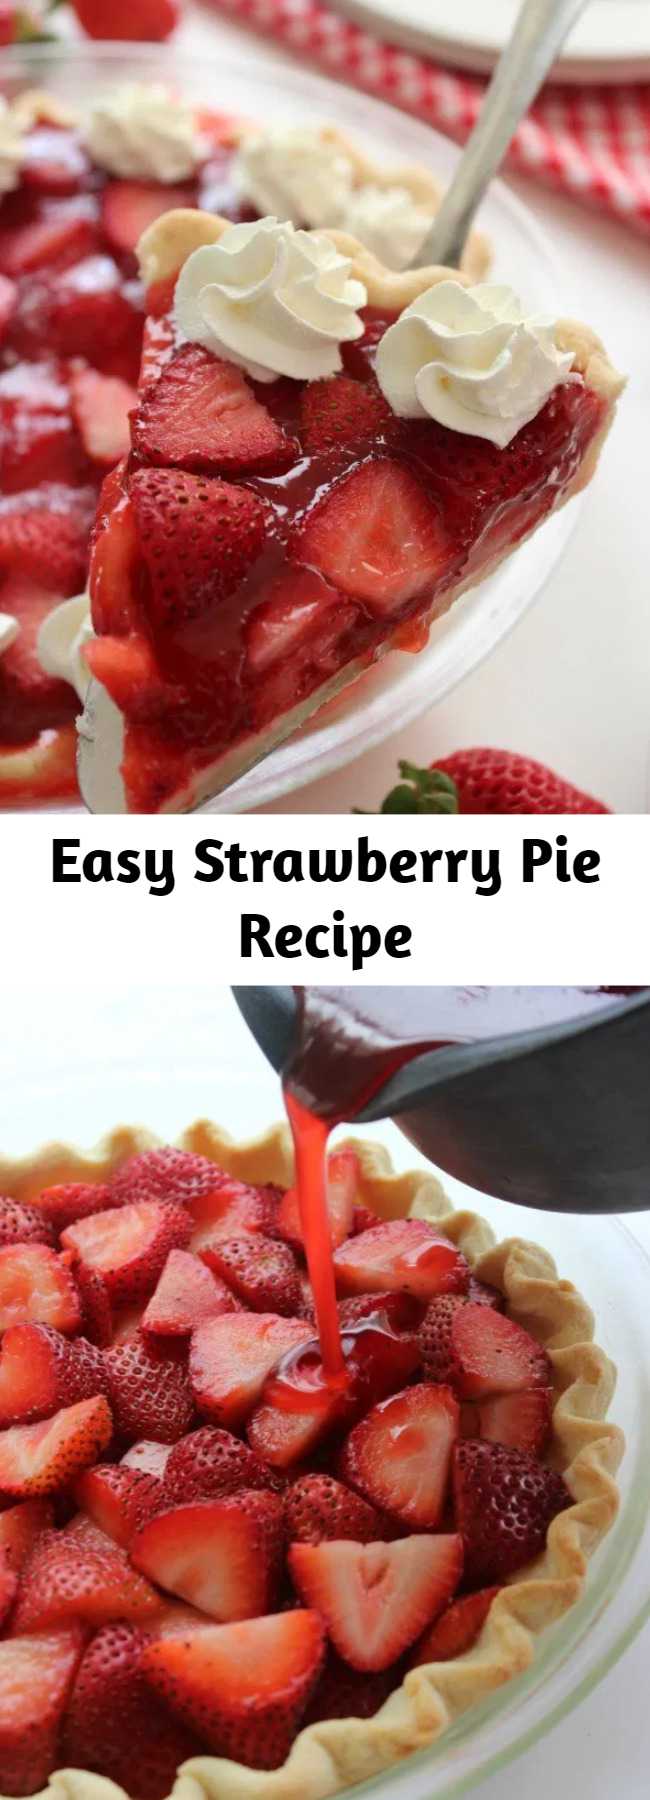 Easy Strawberry Pie Recipe - This super simple Strawberry Pie Recipe is loaded with strawberries and a homemade jelly filling. You will find it to be like the same you find at Frisch’s or Shoney’s. Oh so YUMMY! Since this pie starts with a store bought crust, you can whip it up in no time at all.